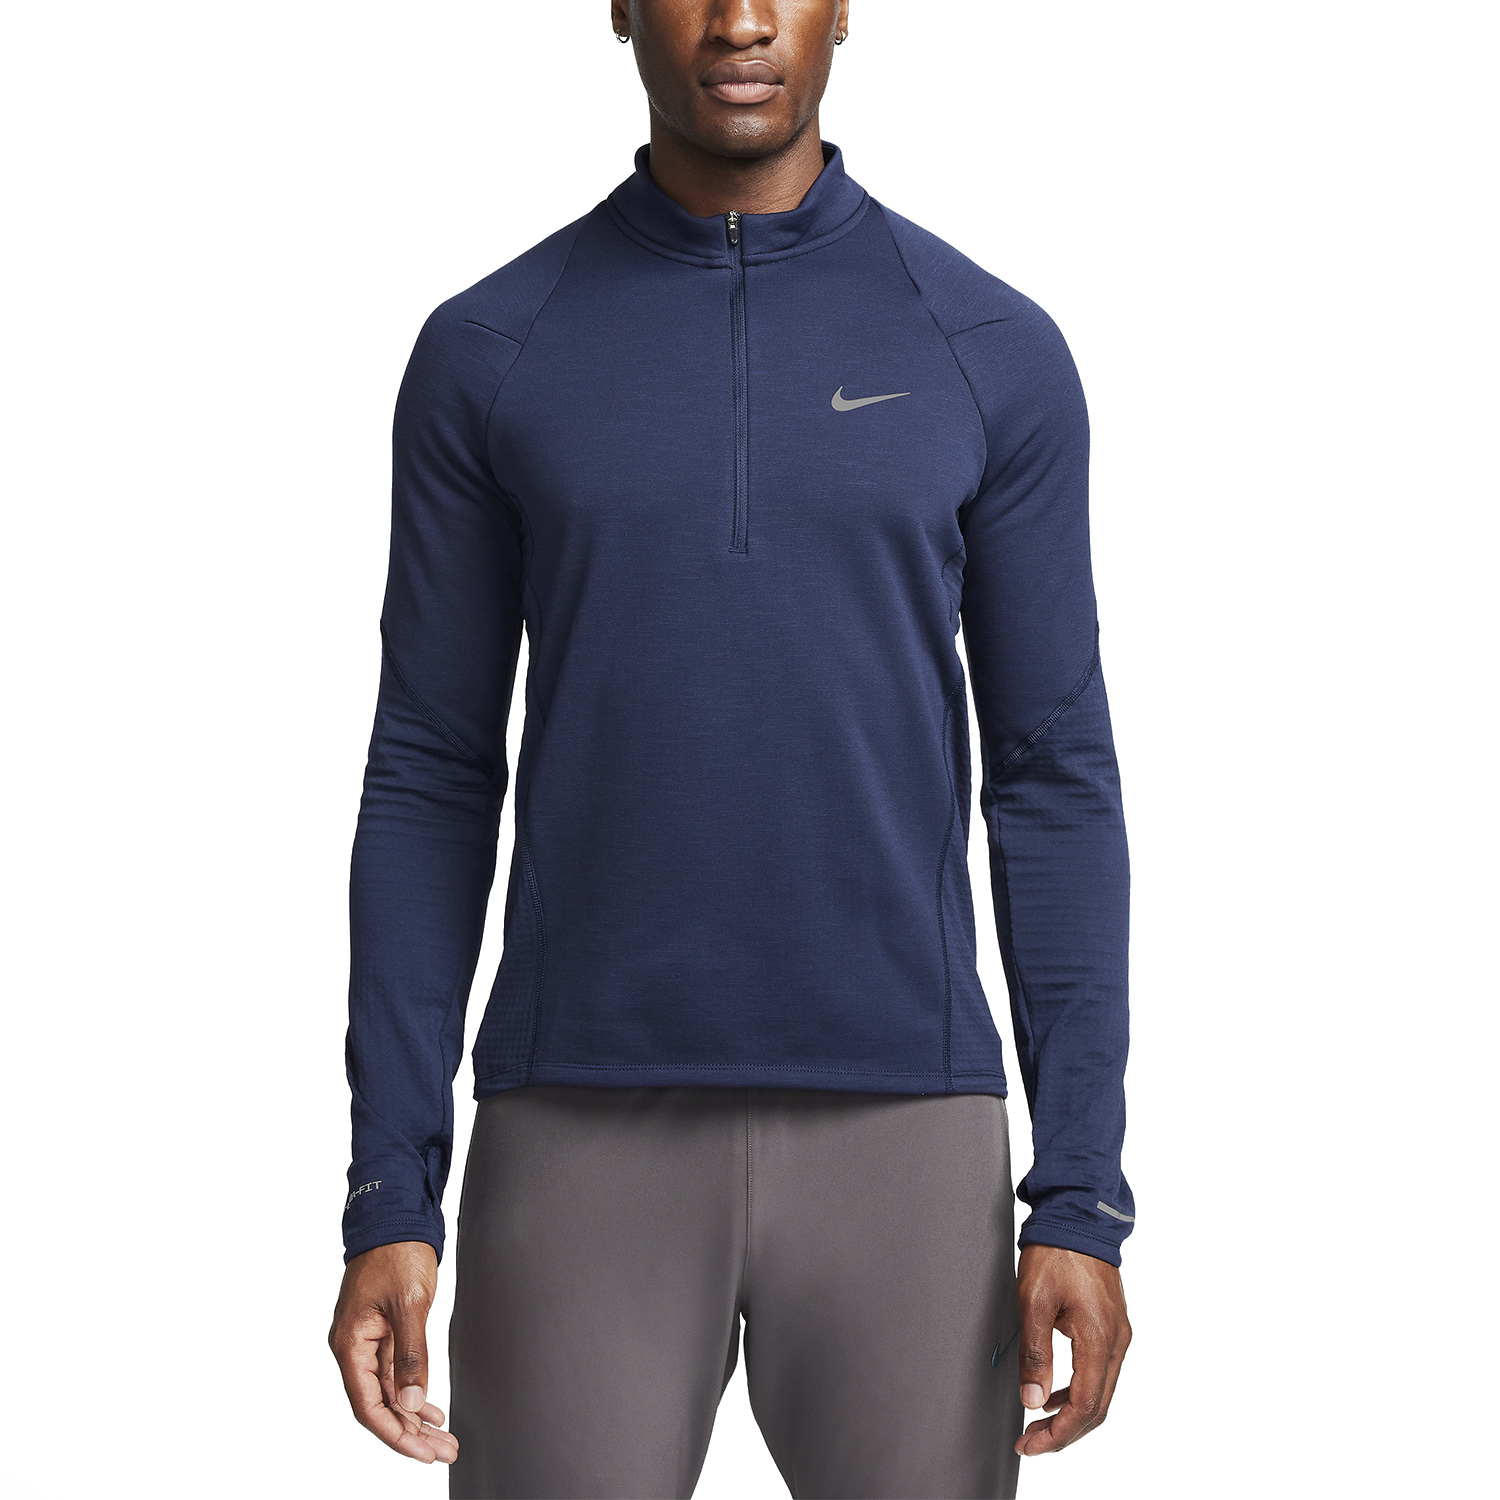 Nike Therma-FIT Element Camisa - Obsidian/Reflective Silver